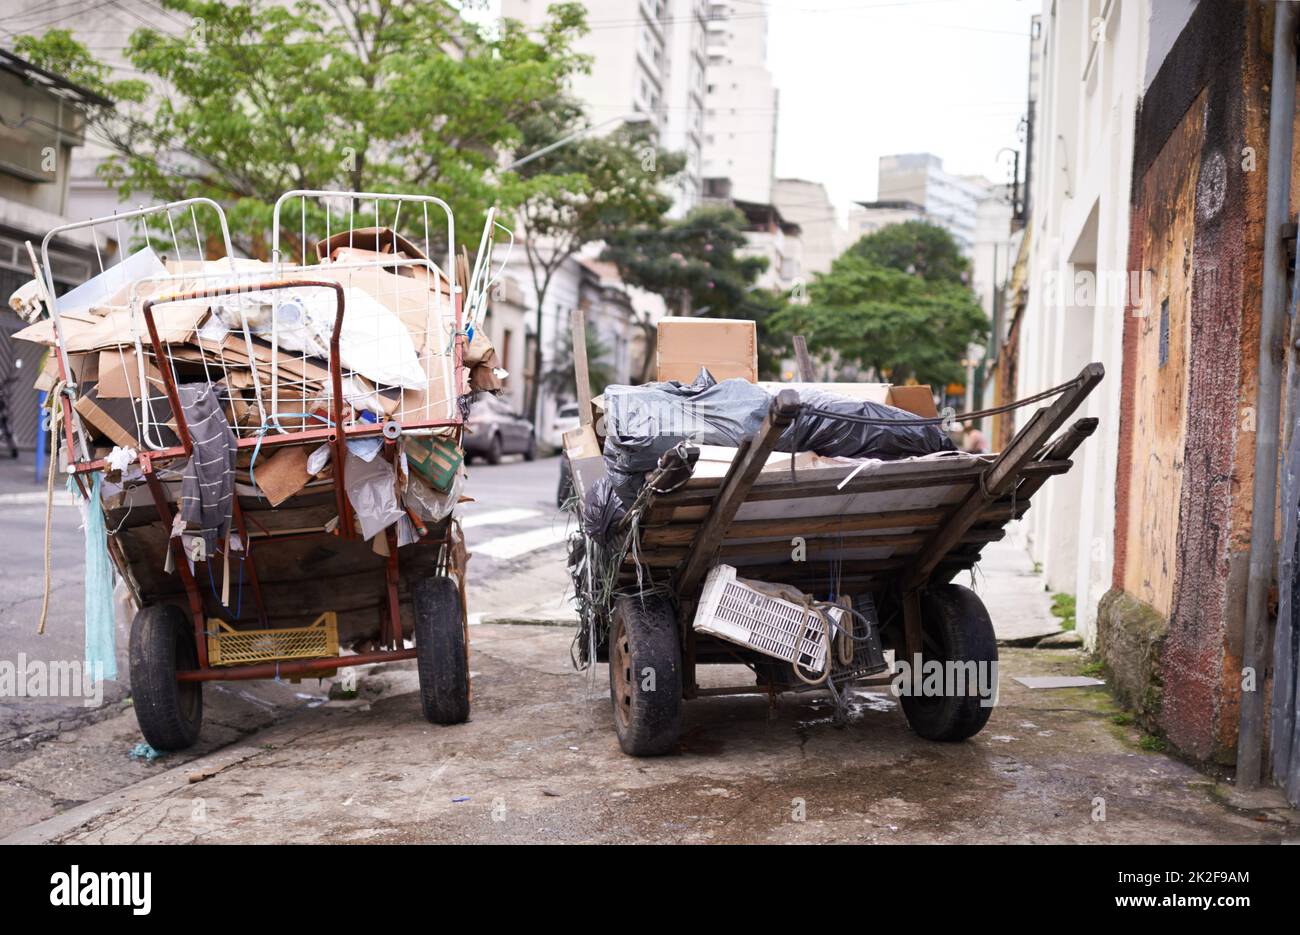 Poverty abounds. Shot of carts full of garbage in the street of a poor neighbourhood. Stock Photo